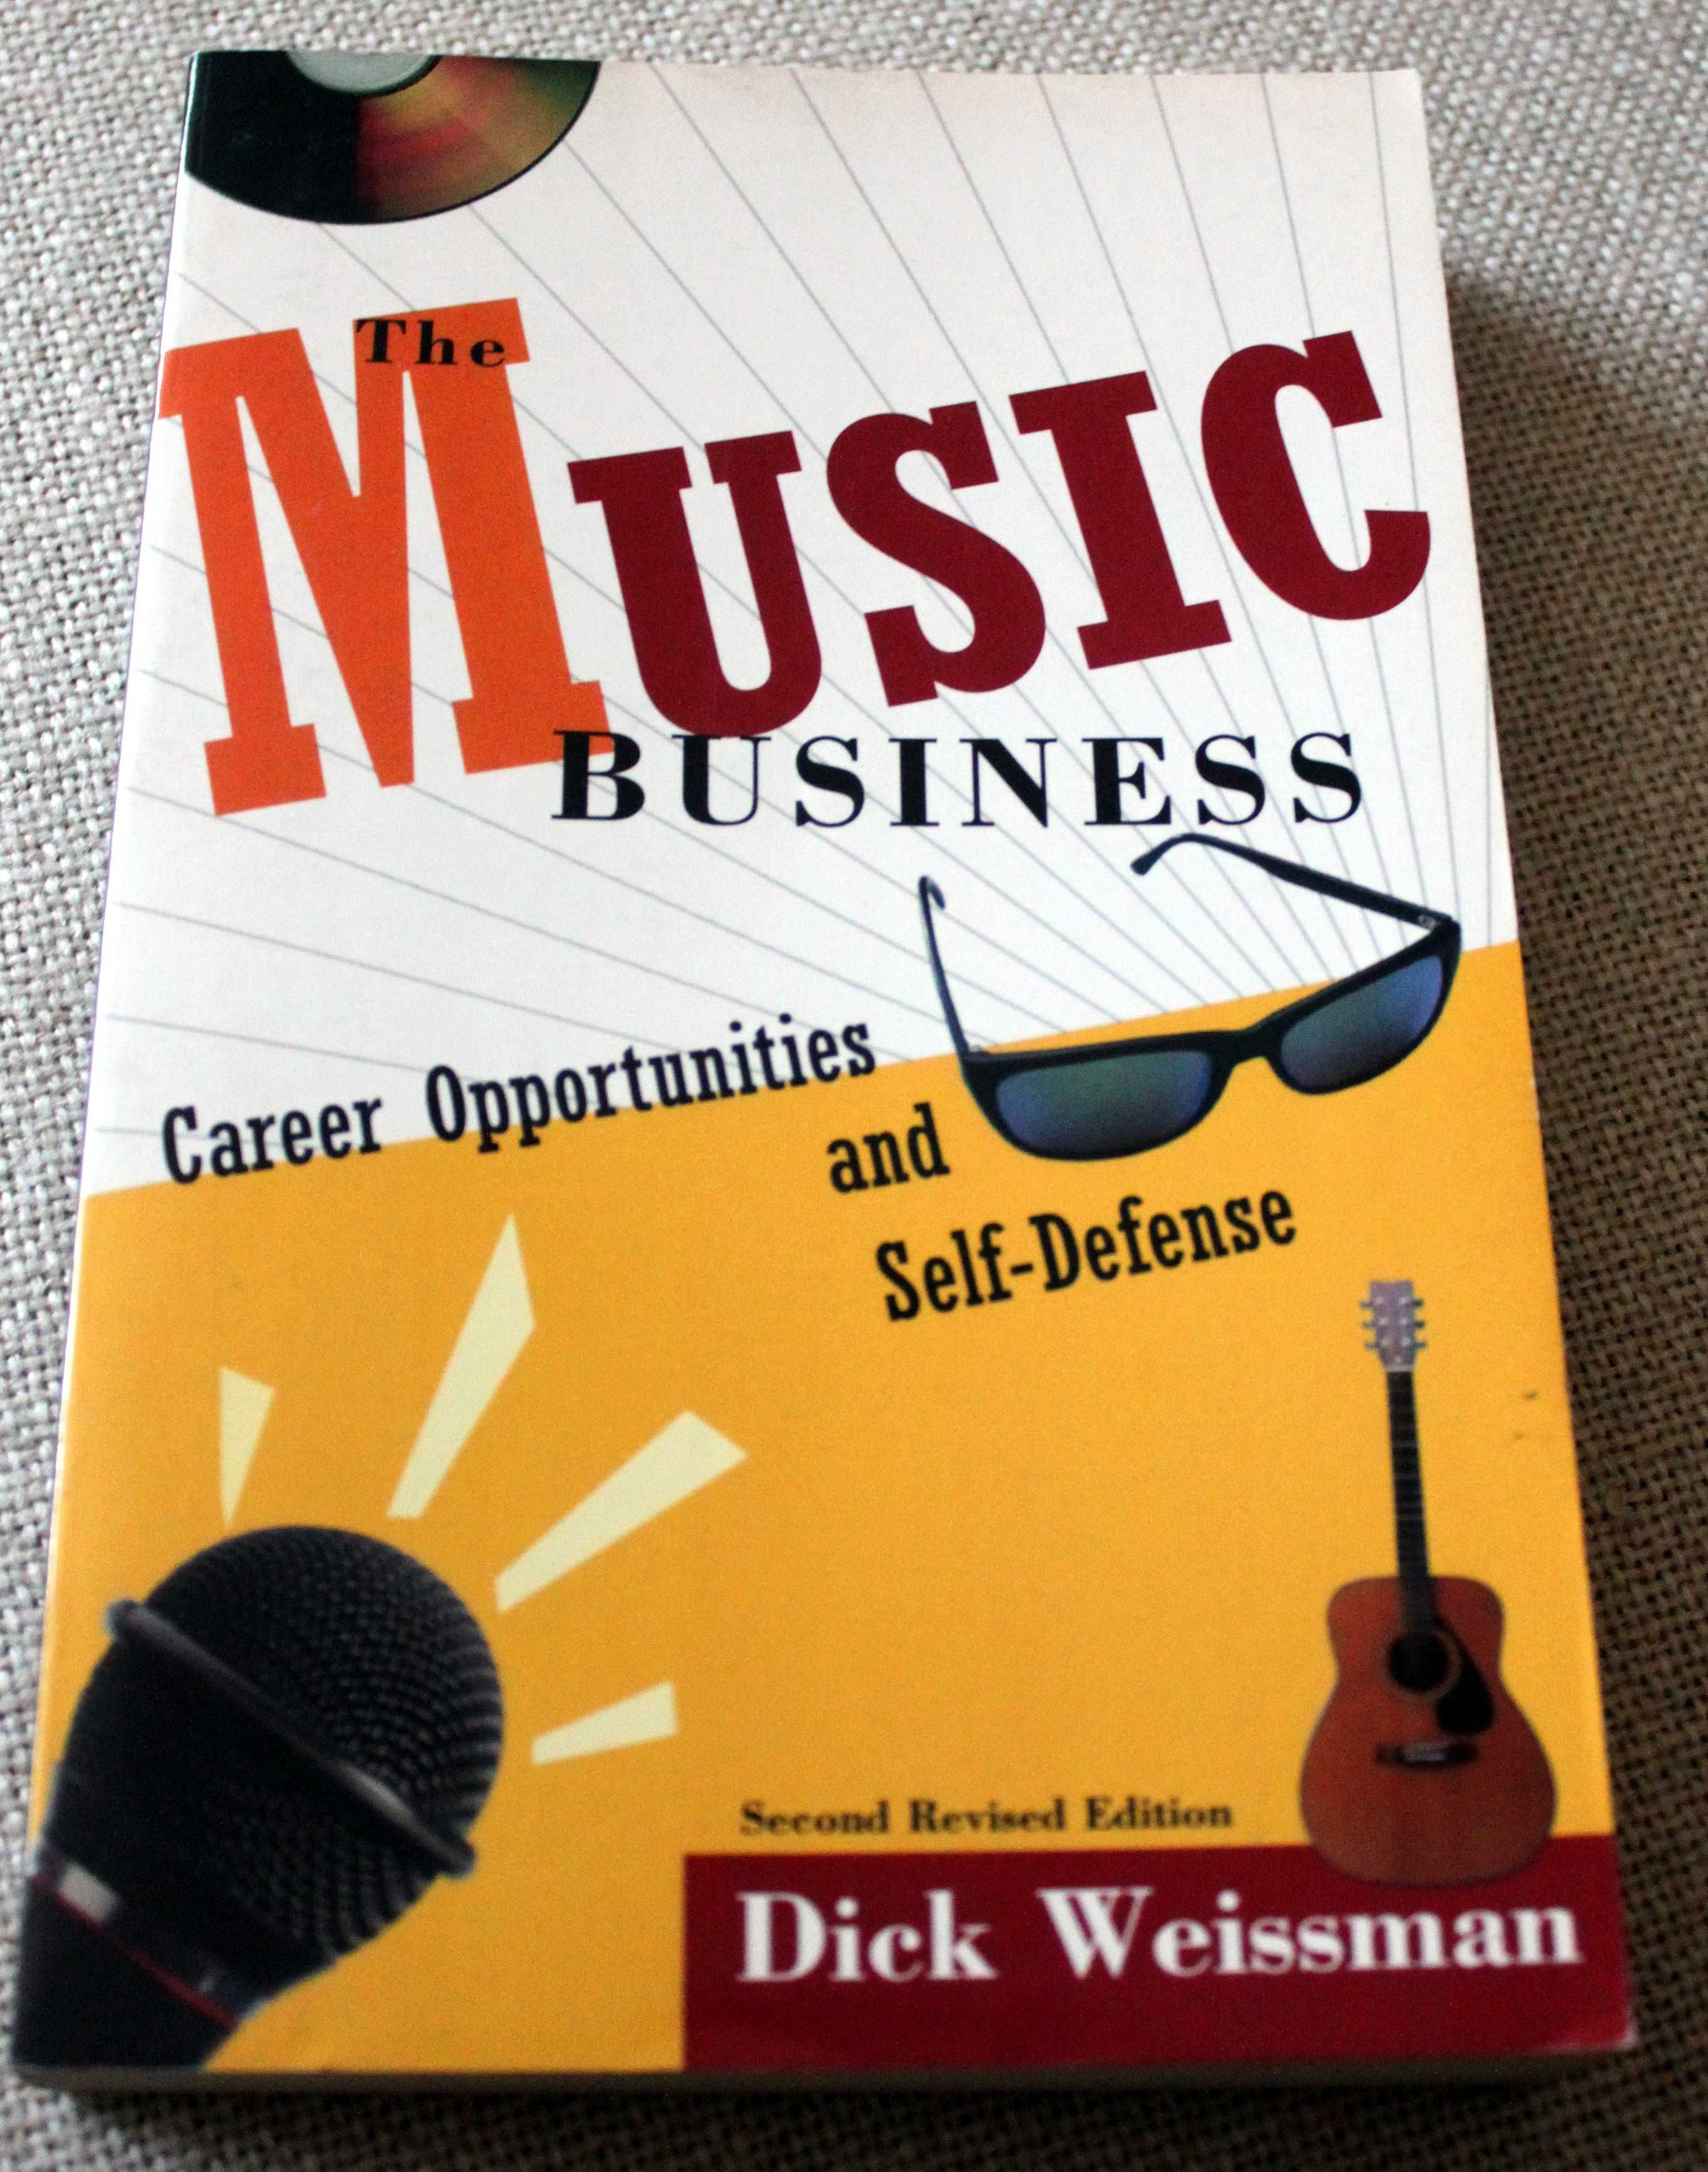 Music Business. Career Opportunities and Self-Defence - Dick Weissman